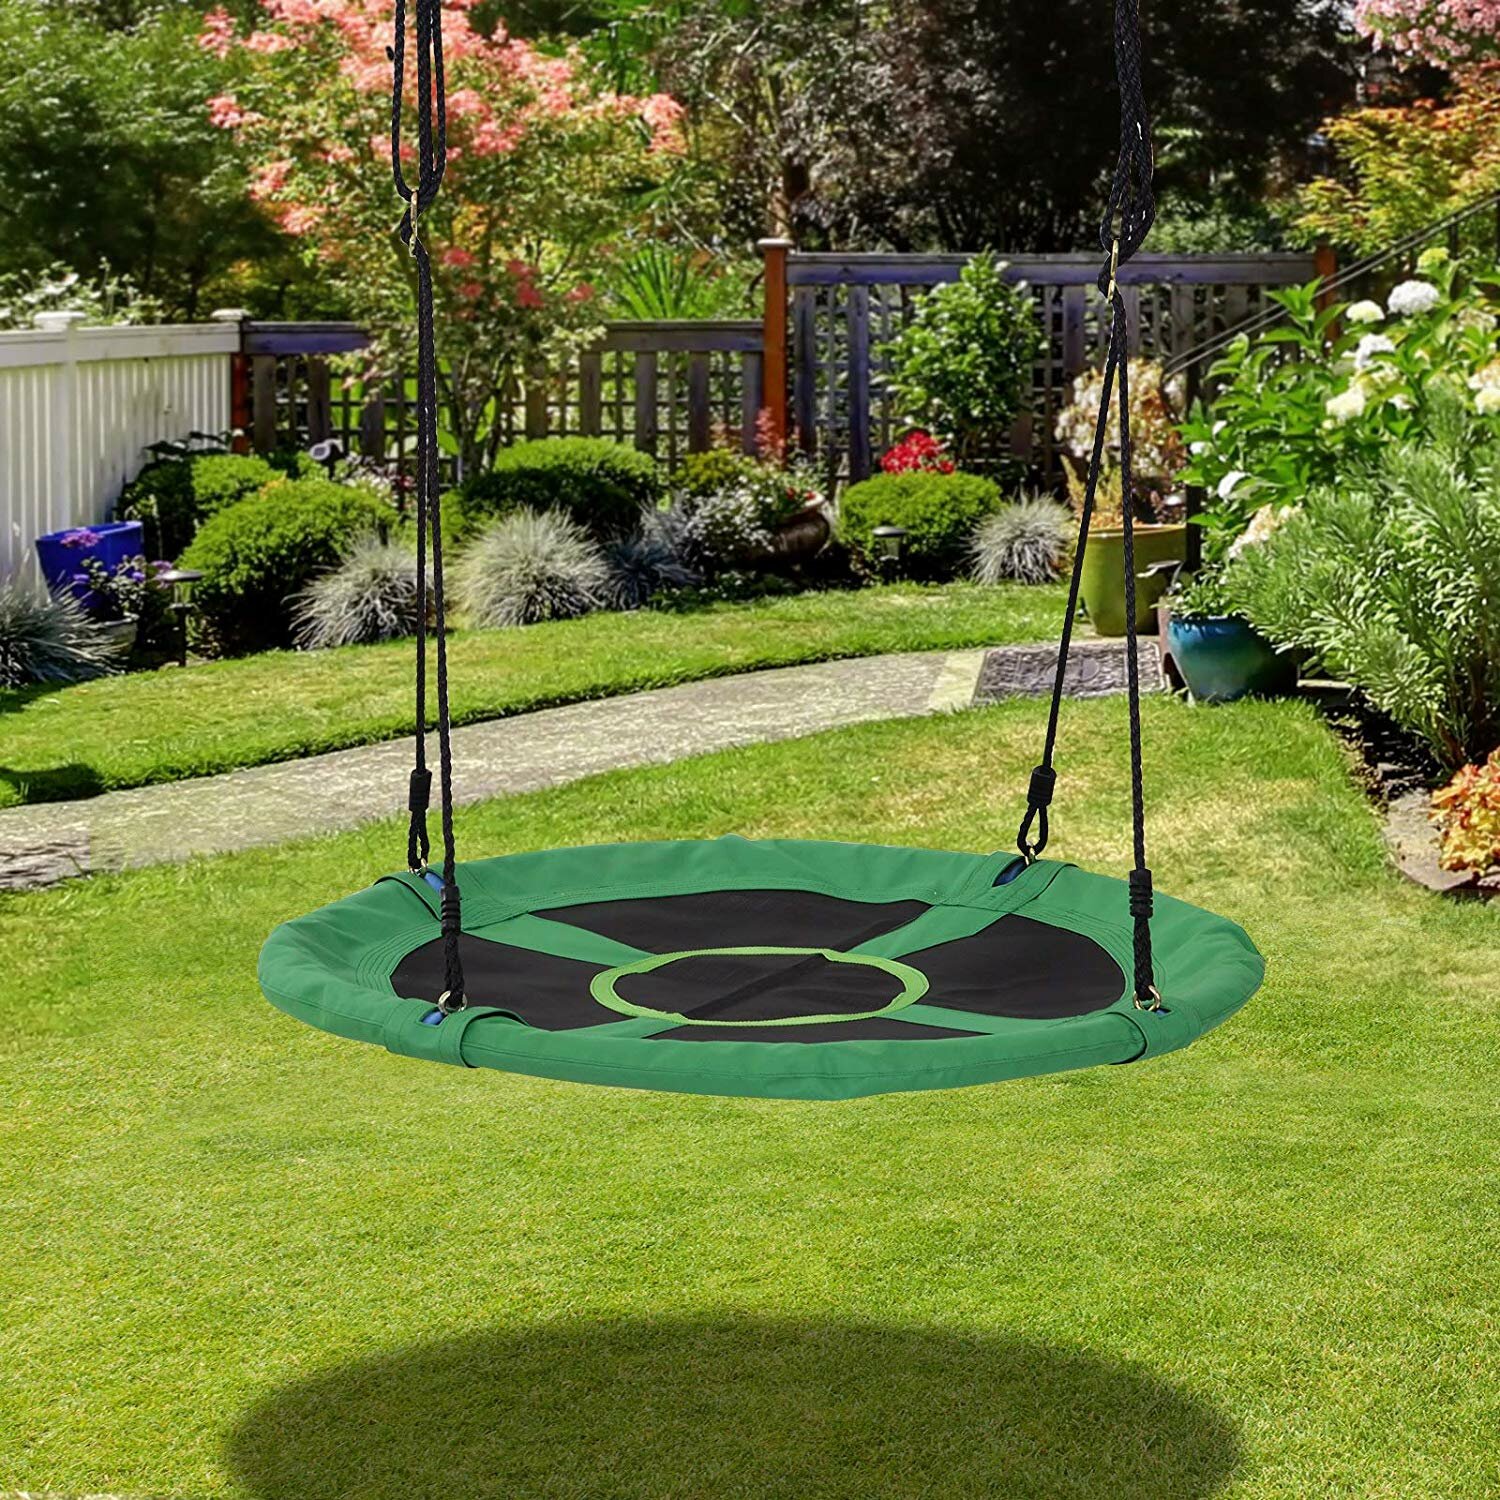 Details about   Giant 40" Disc Swing Seat Flying Saucer Tree Web Swing Playground Backyard Black 